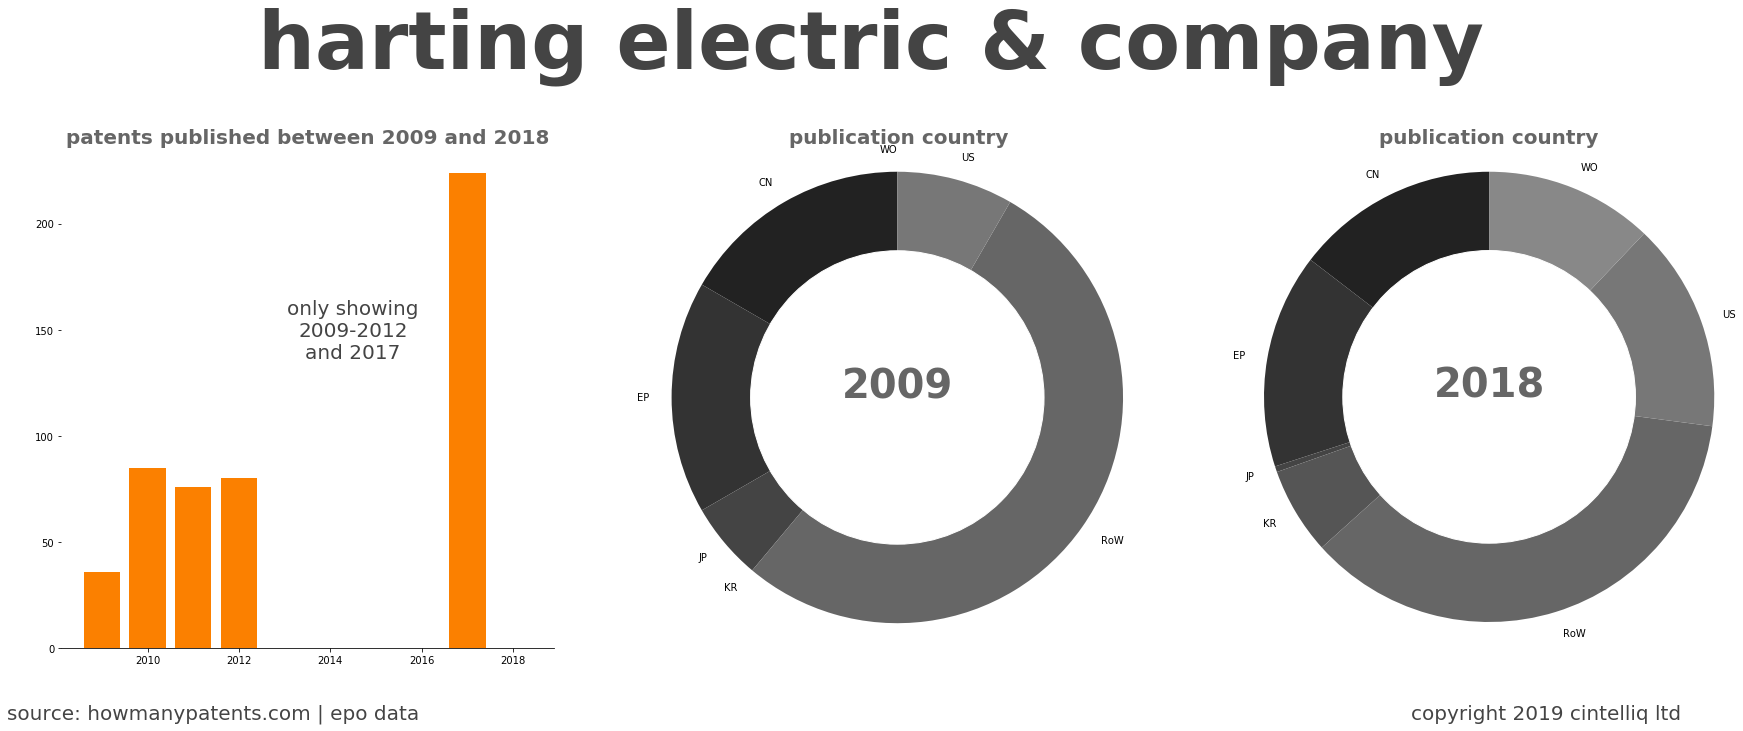 summary of patents for Harting Electric & Company